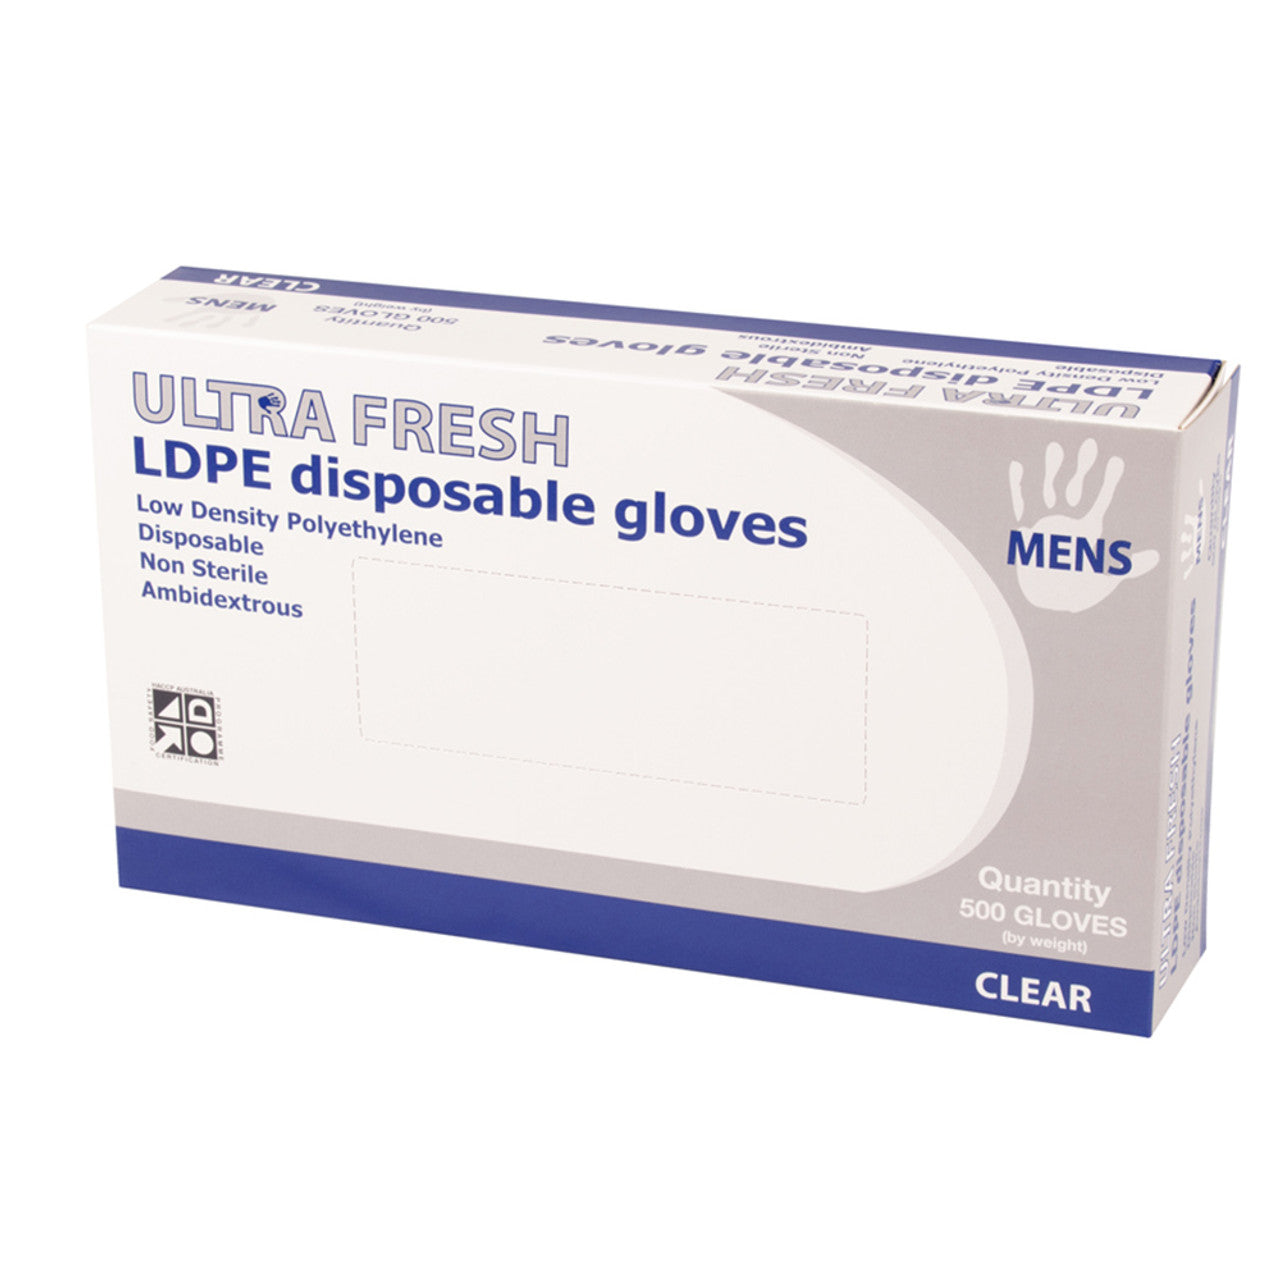 Ultra Fresh LDPE Disposable Gloves (Ladies) Box of 500